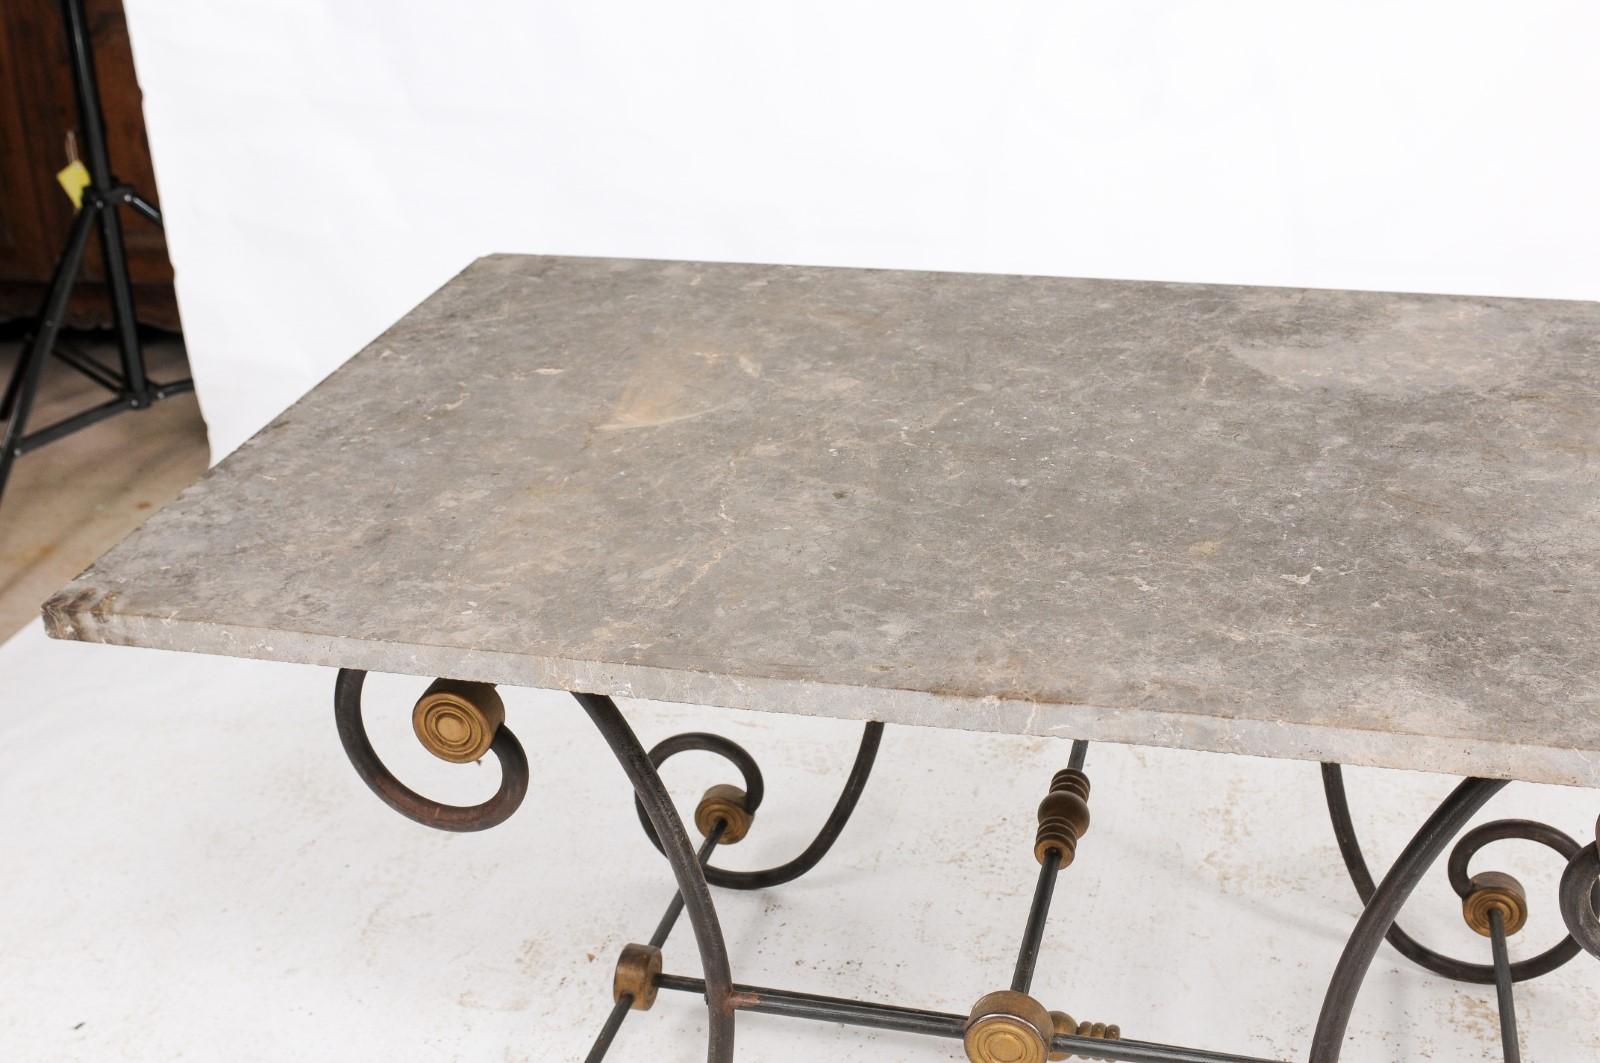 French Butcher Table with Scrolled Iron Base and Wooden Top, Late 19th Century For Sale 4